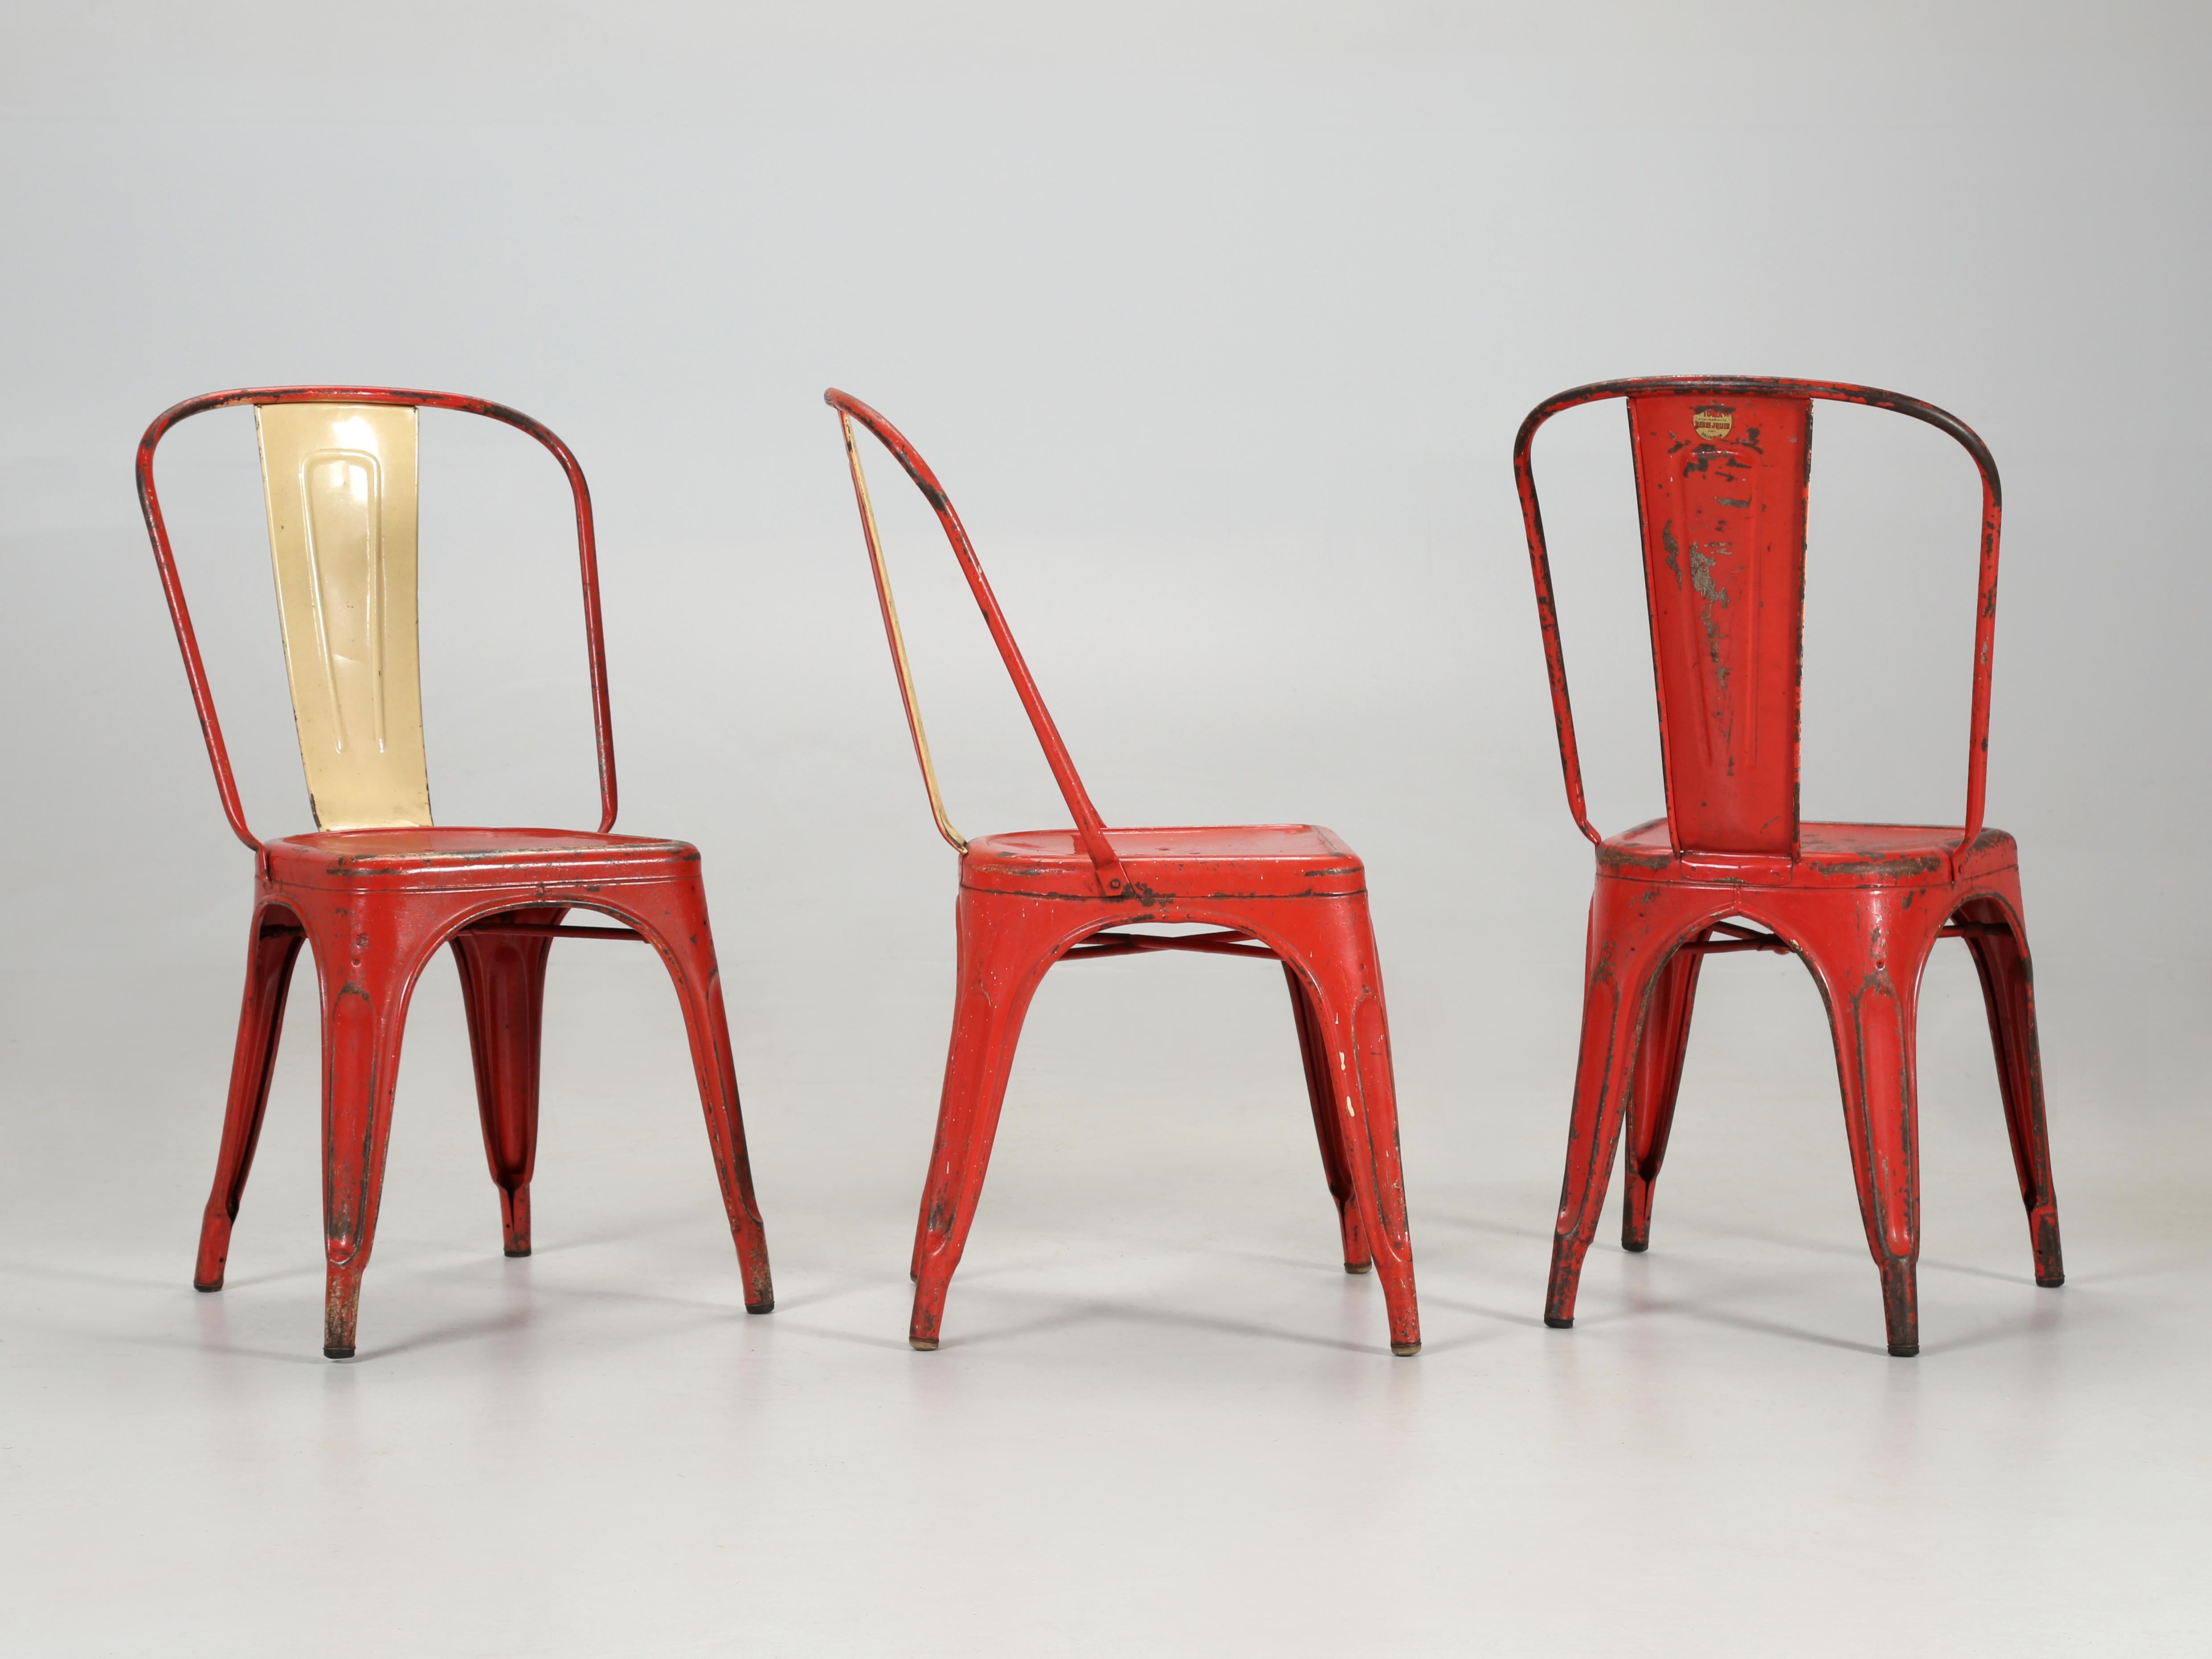 The Tolix (stacking) kitchen chairs are considered an iconic design and their matching stools (also in stock), and have been displayed in the New York Museum of Modern Art, Germany’s Vitra Design Museum, and Paris’s Pompidou Center. They have a